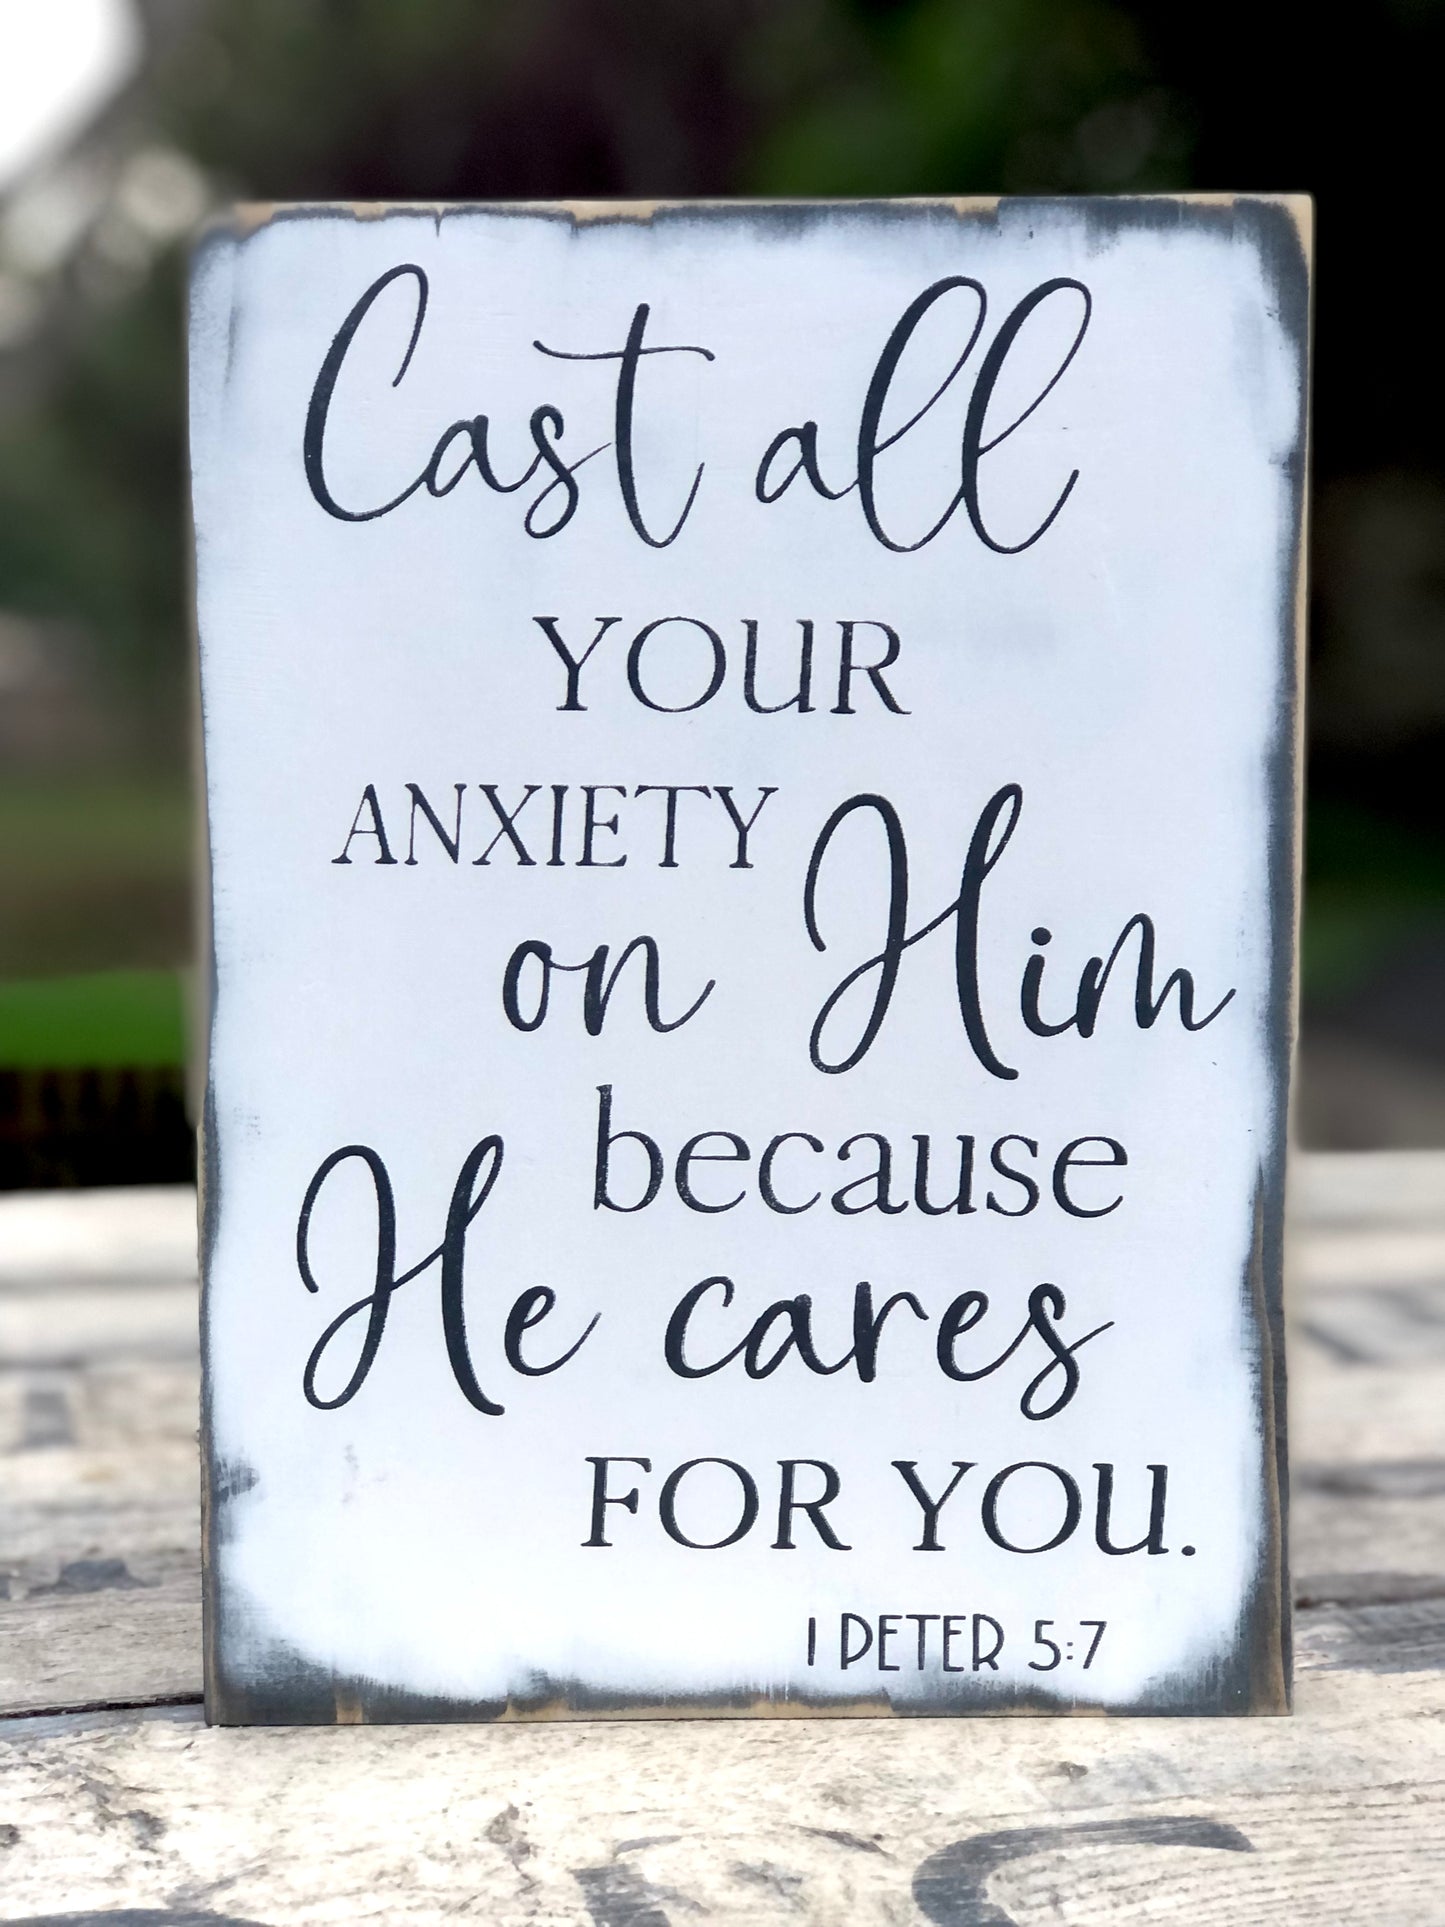 CAST ALL YOUR ANXIETY ON HIM BECAUSE HE CARES FOR YOU. - WOOD SIGN